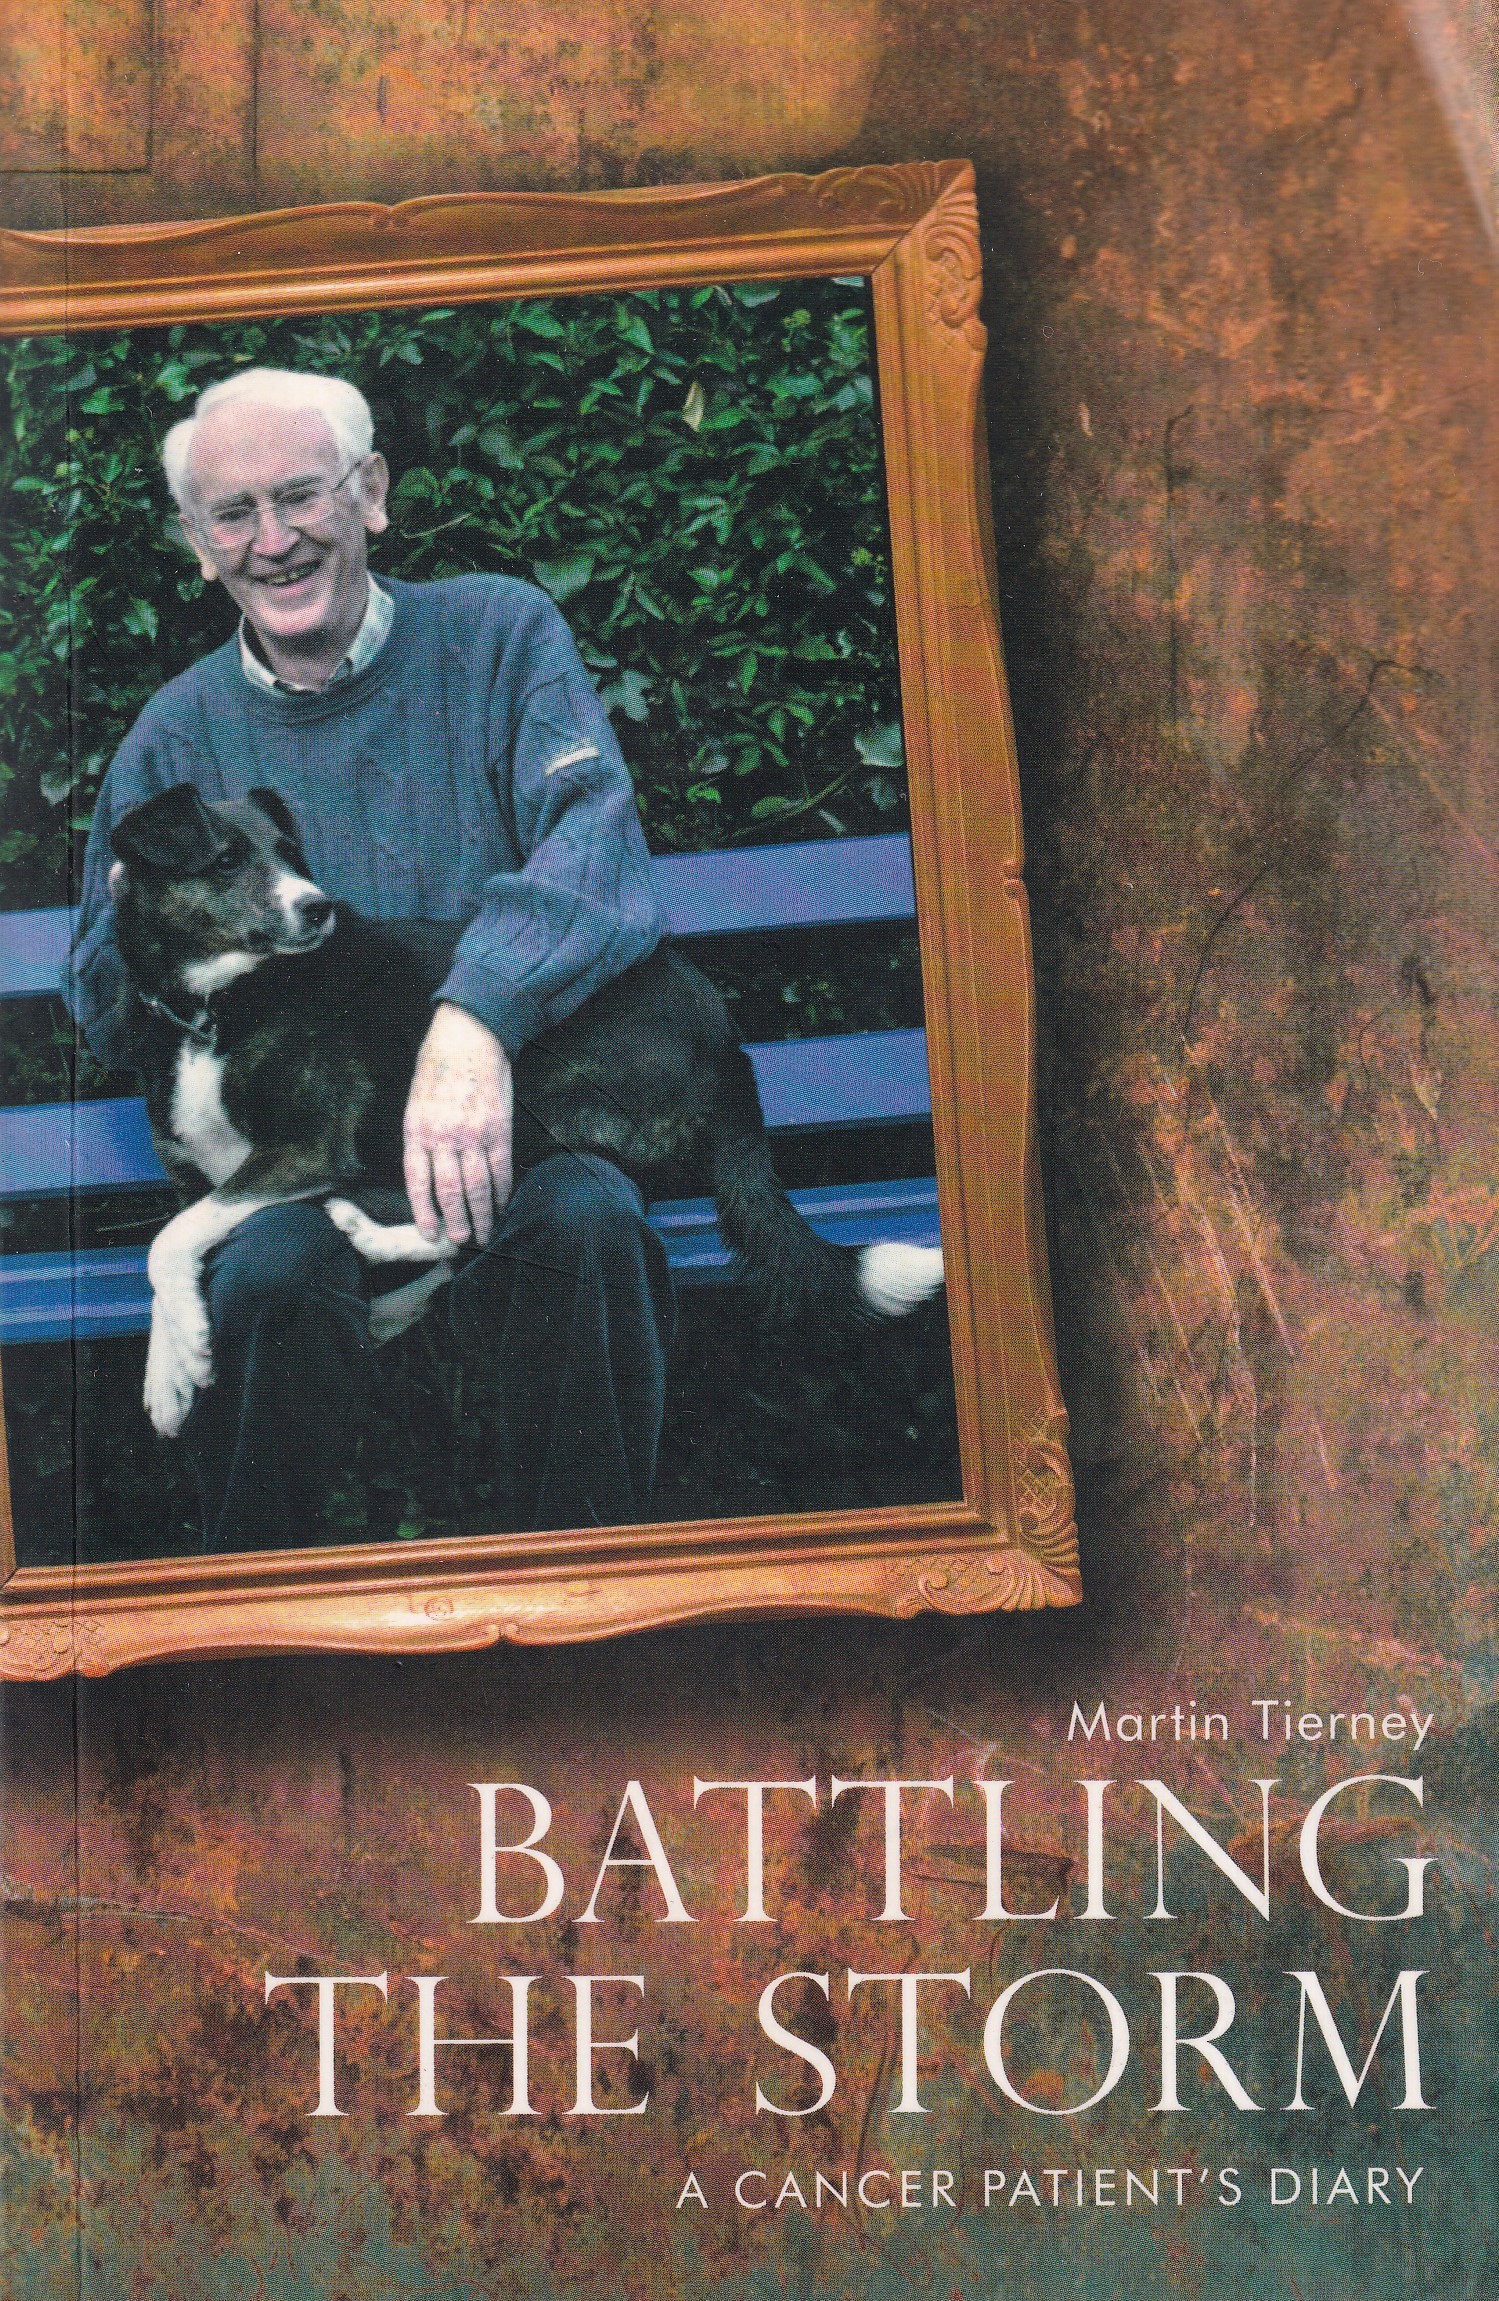 Battling the Storm: A Cancer Patient s Diary by Martin Tierney